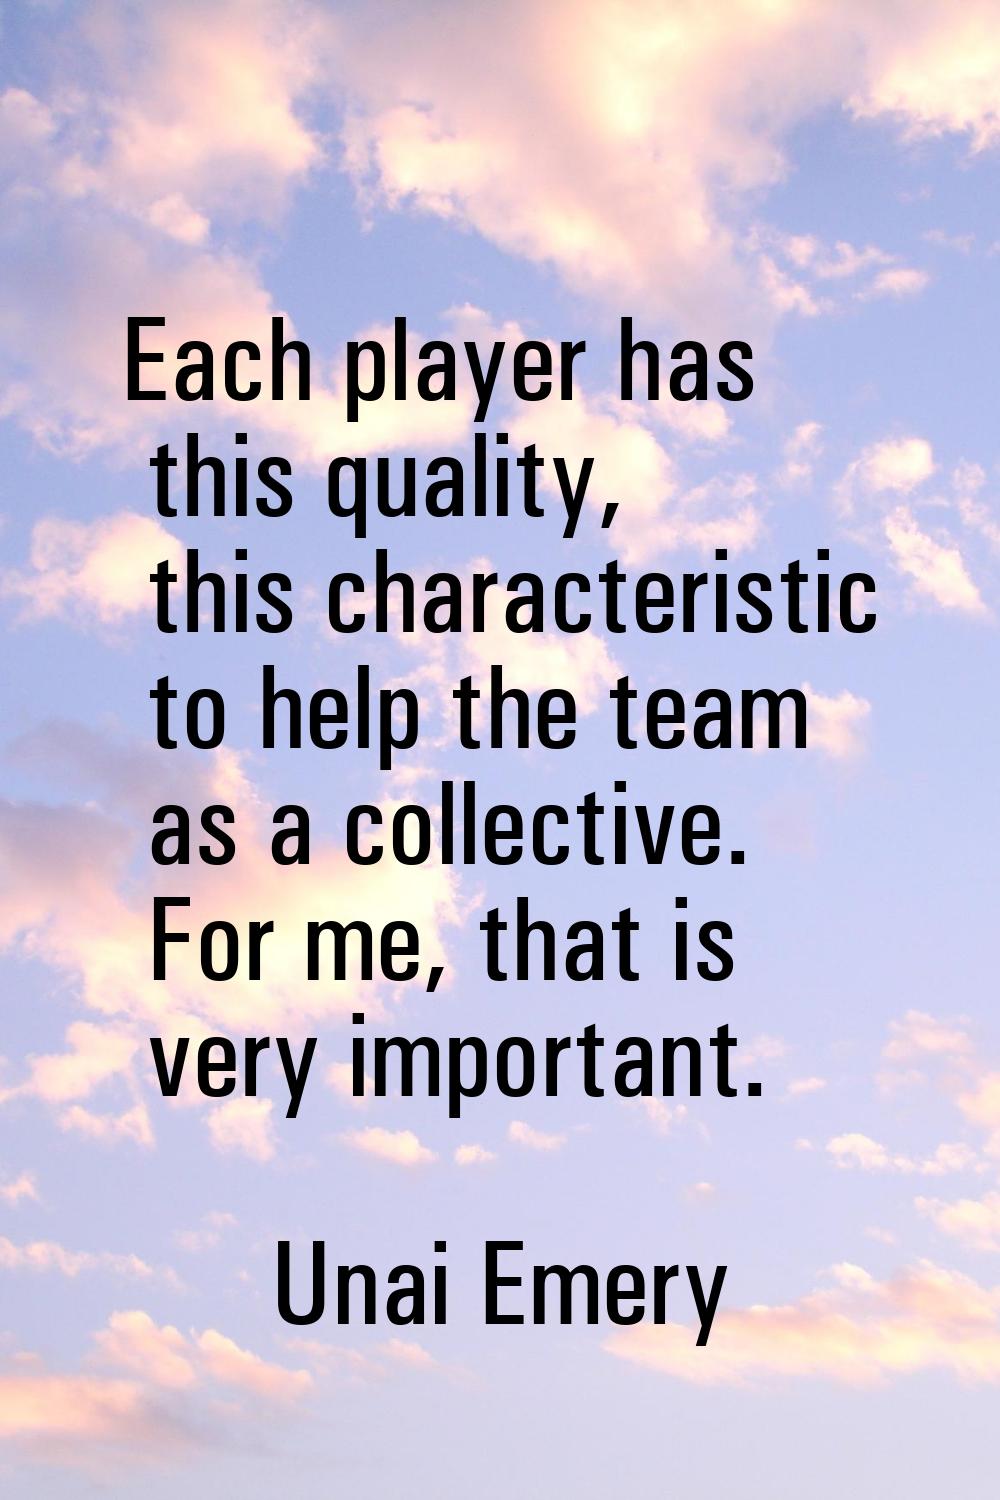 Each player has this quality, this characteristic to help the team as a collective. For me, that is